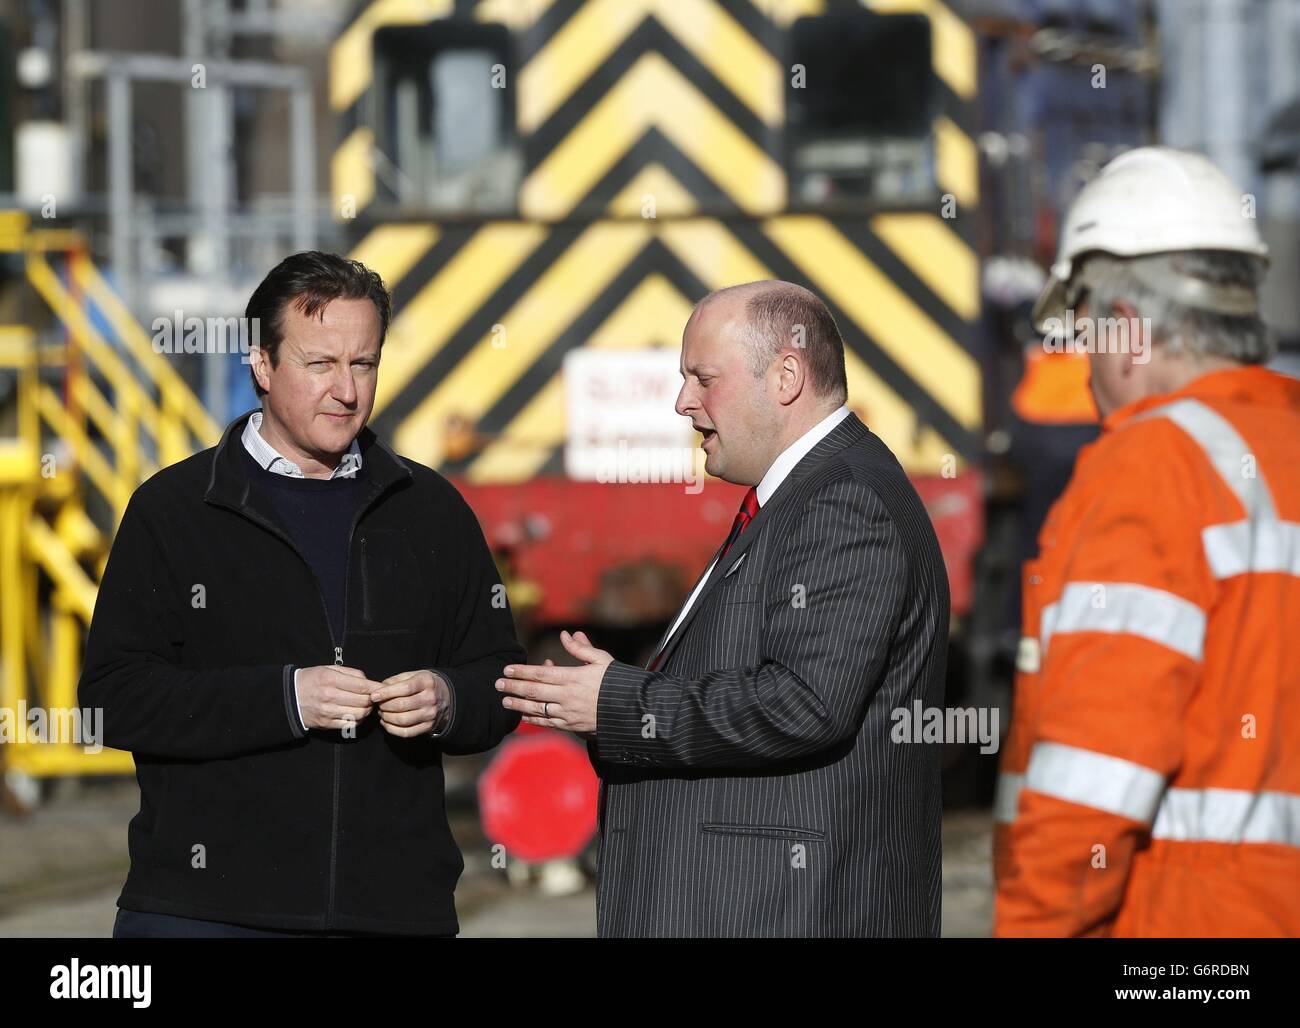 Prime Minister David Cameron (left) speaks to Deputy General Manager Andy Mellors, during his visit to the First Great Western's Laira rail depot, in Plymouth, south west England, which is used to service the operator's high speed trains. Stock Photo